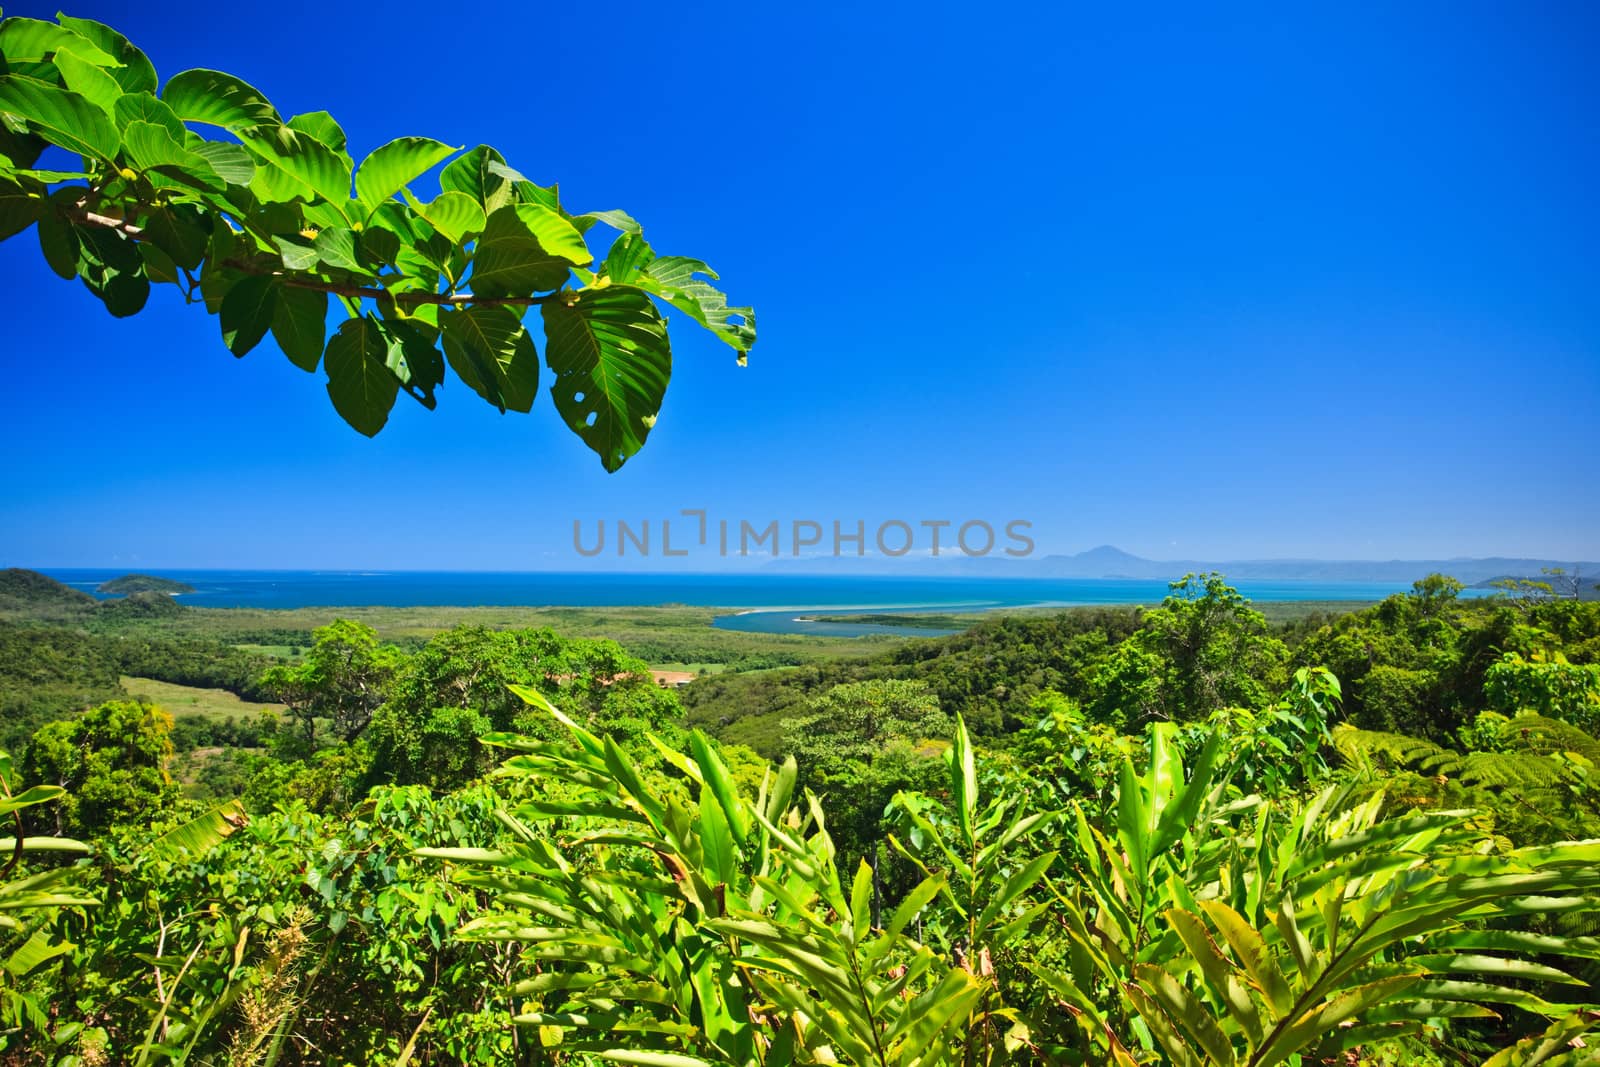 Beautiful nature with trees and beach over the blue sky